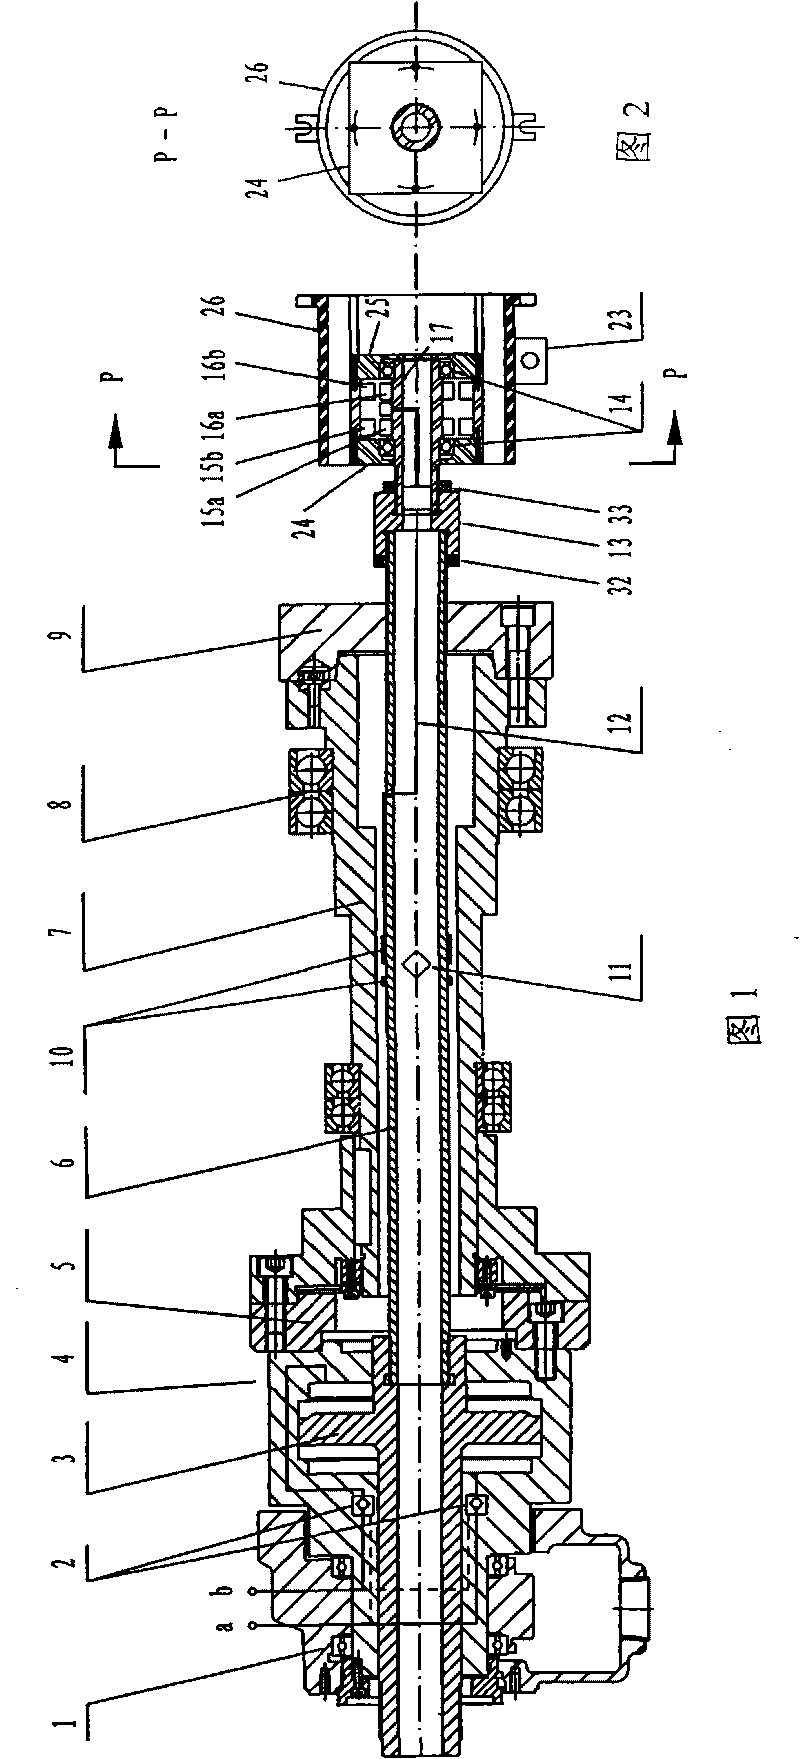 Device for measuring push-pull force output by rotating hydraulic cylinder